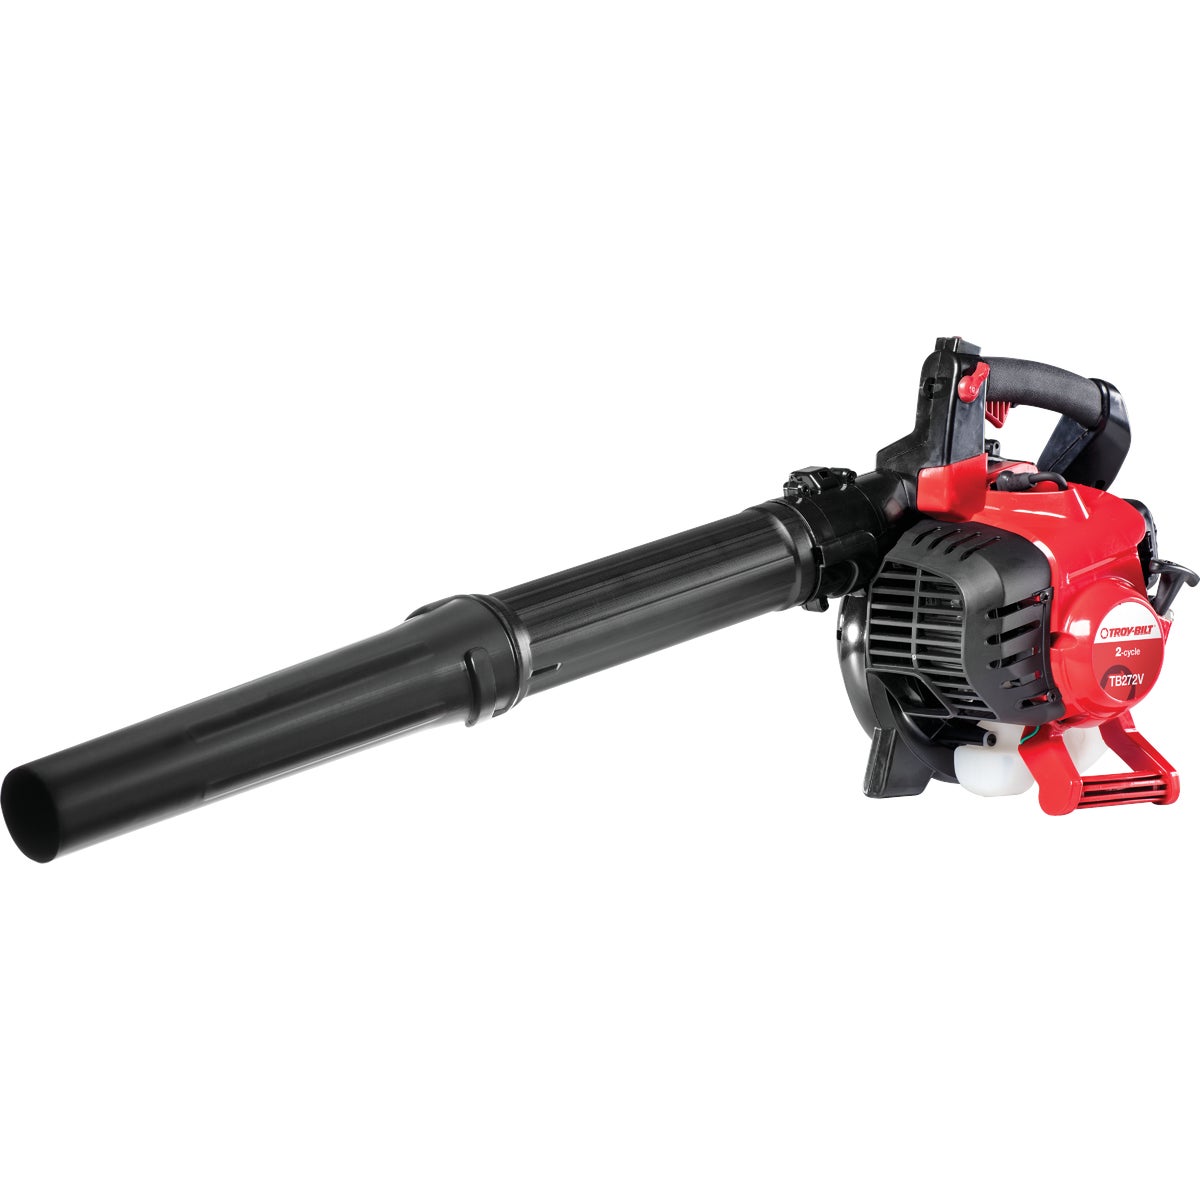 Item 719366, The TB272V gas leaf blower/vac from Troy-Bilt offers the power and 